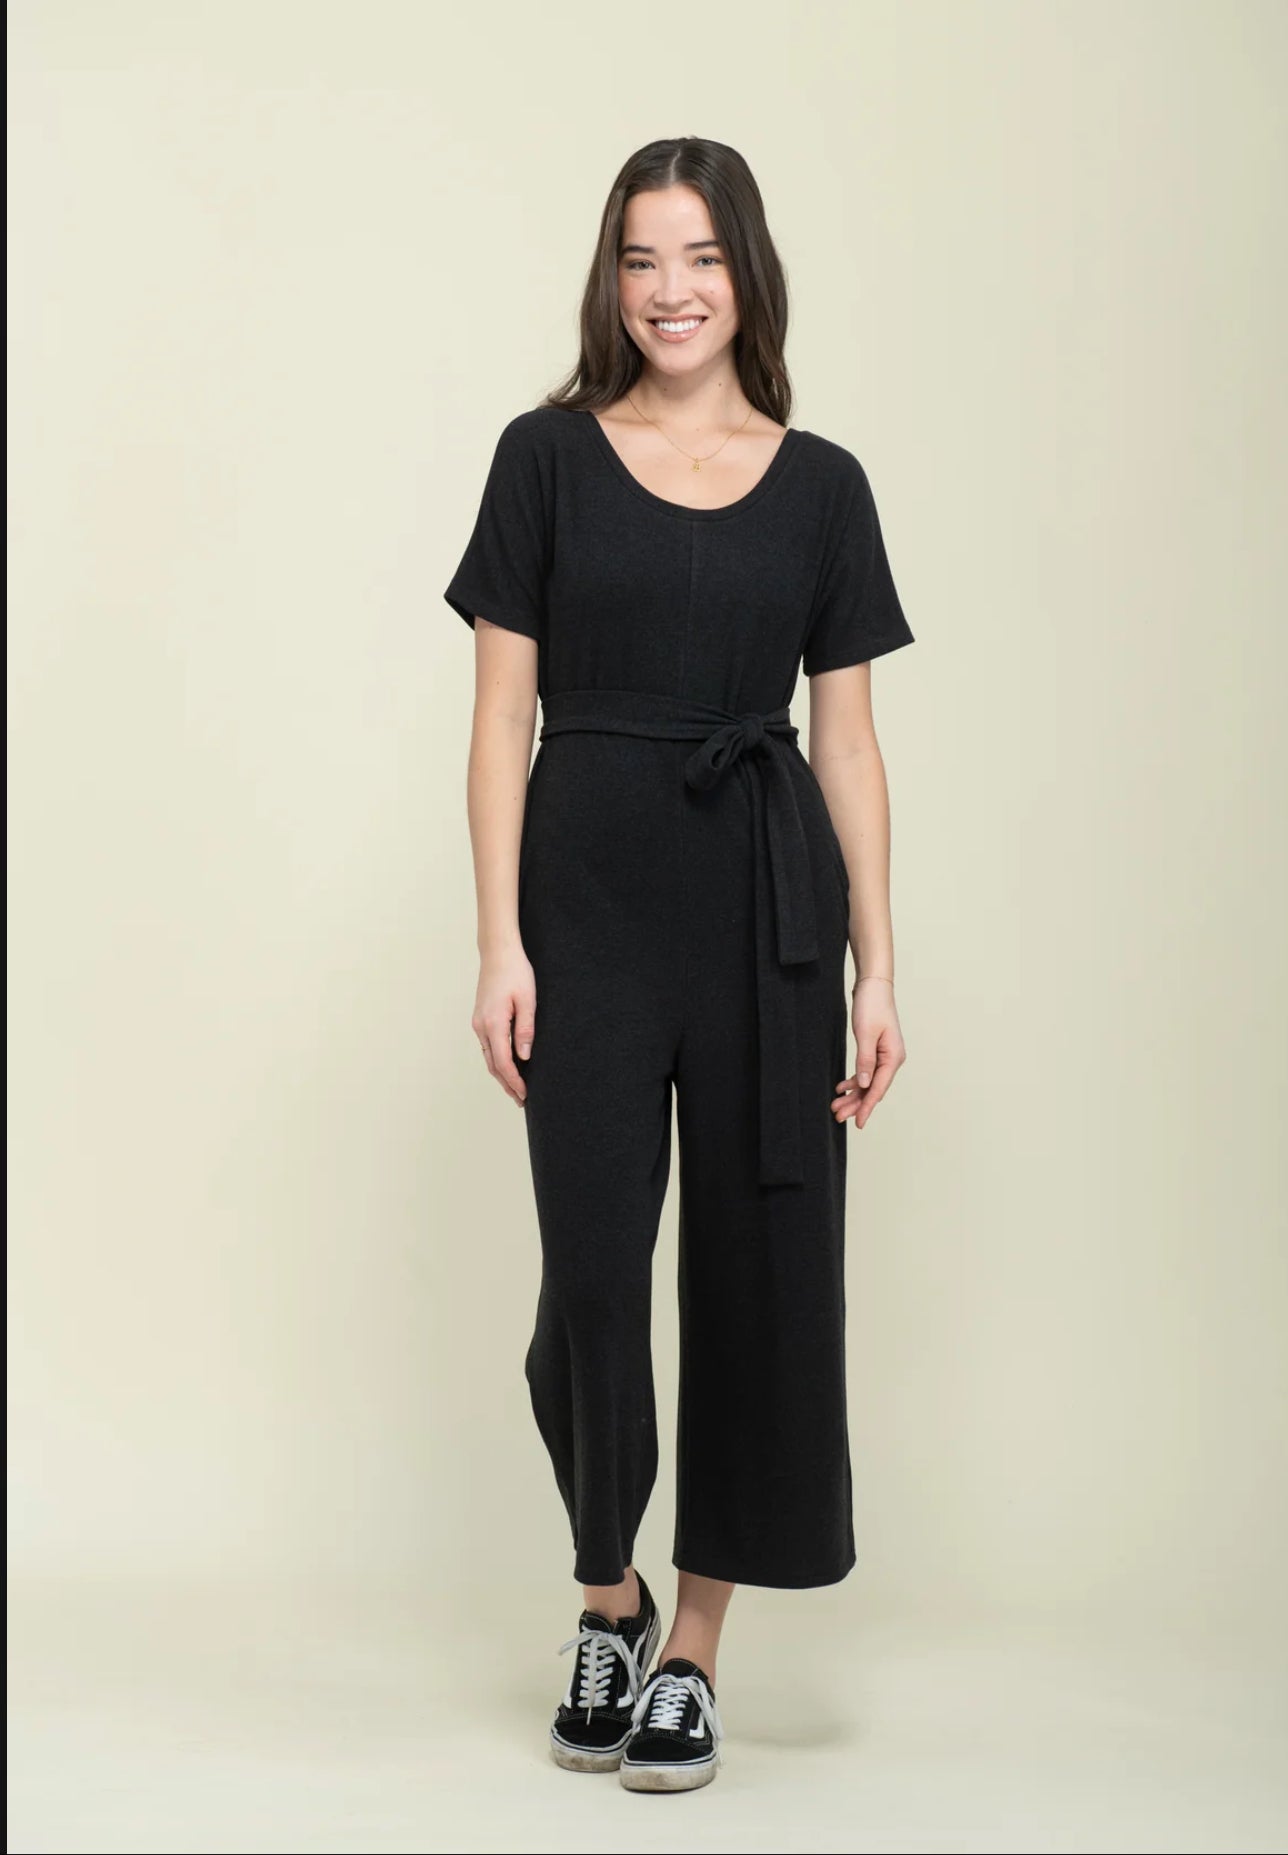 Jonie brushed jersey jumpsuit by Orb - black - Blue Sky Fashions & Lingerie